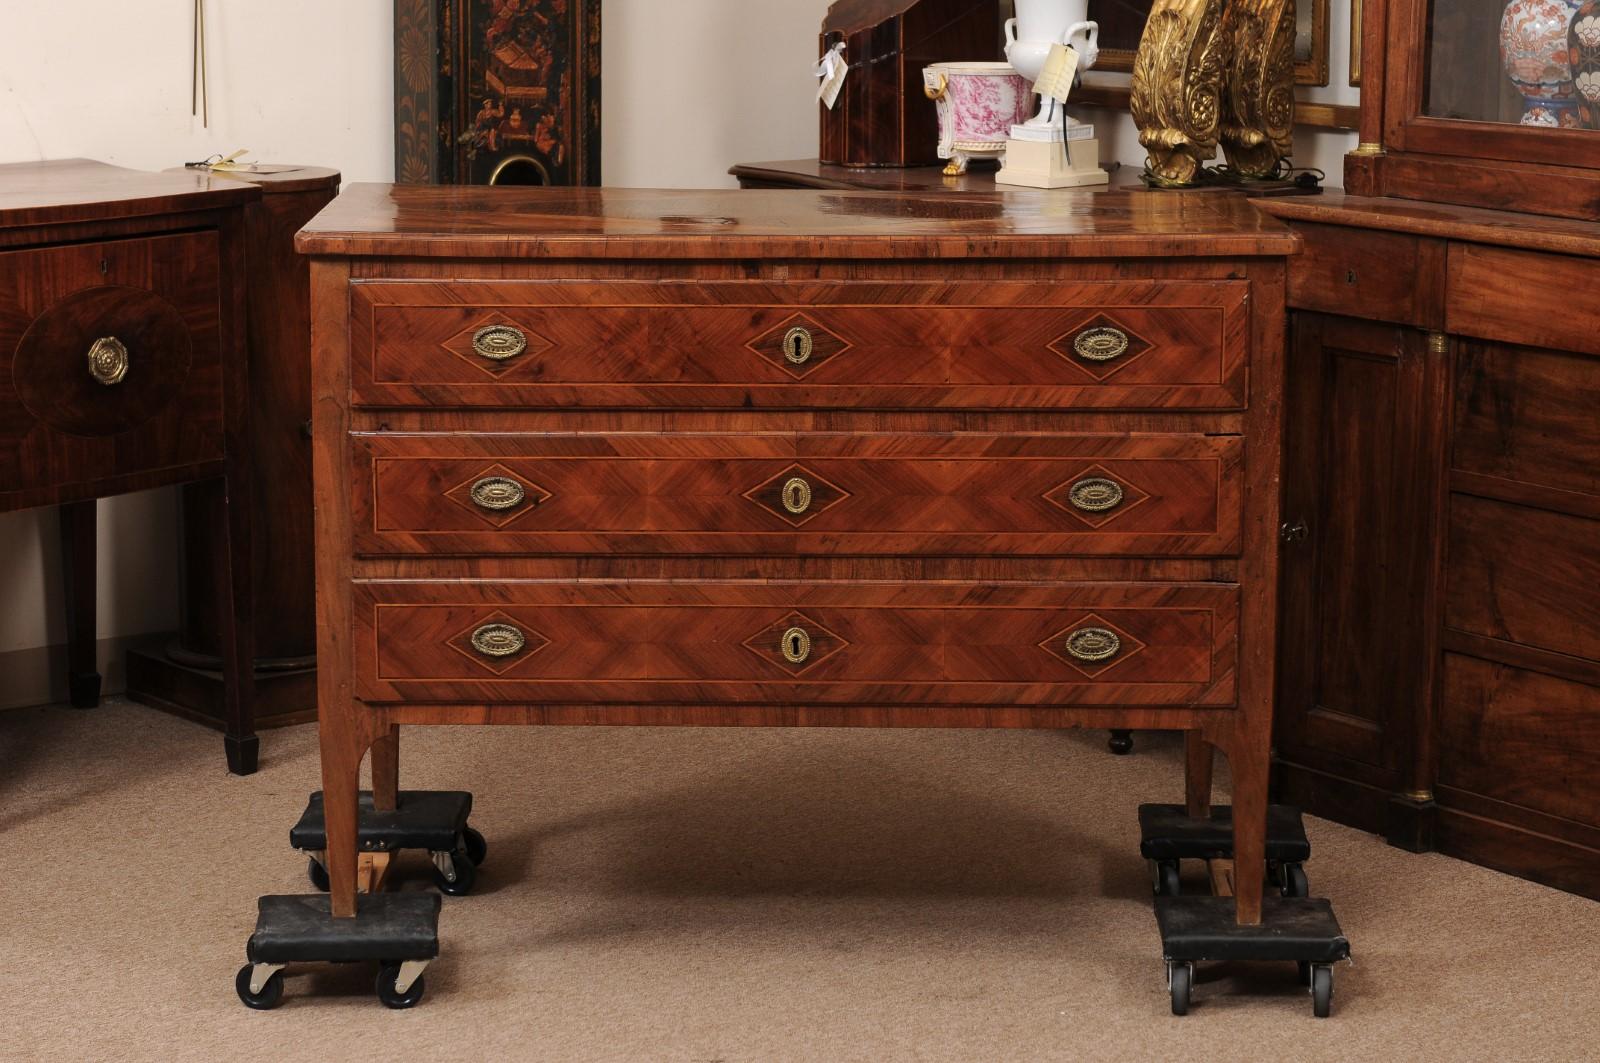 Late 18th Century Italian Neoclassical Parquetry Inlaid Walnut Commode with 3 Dr For Sale 8